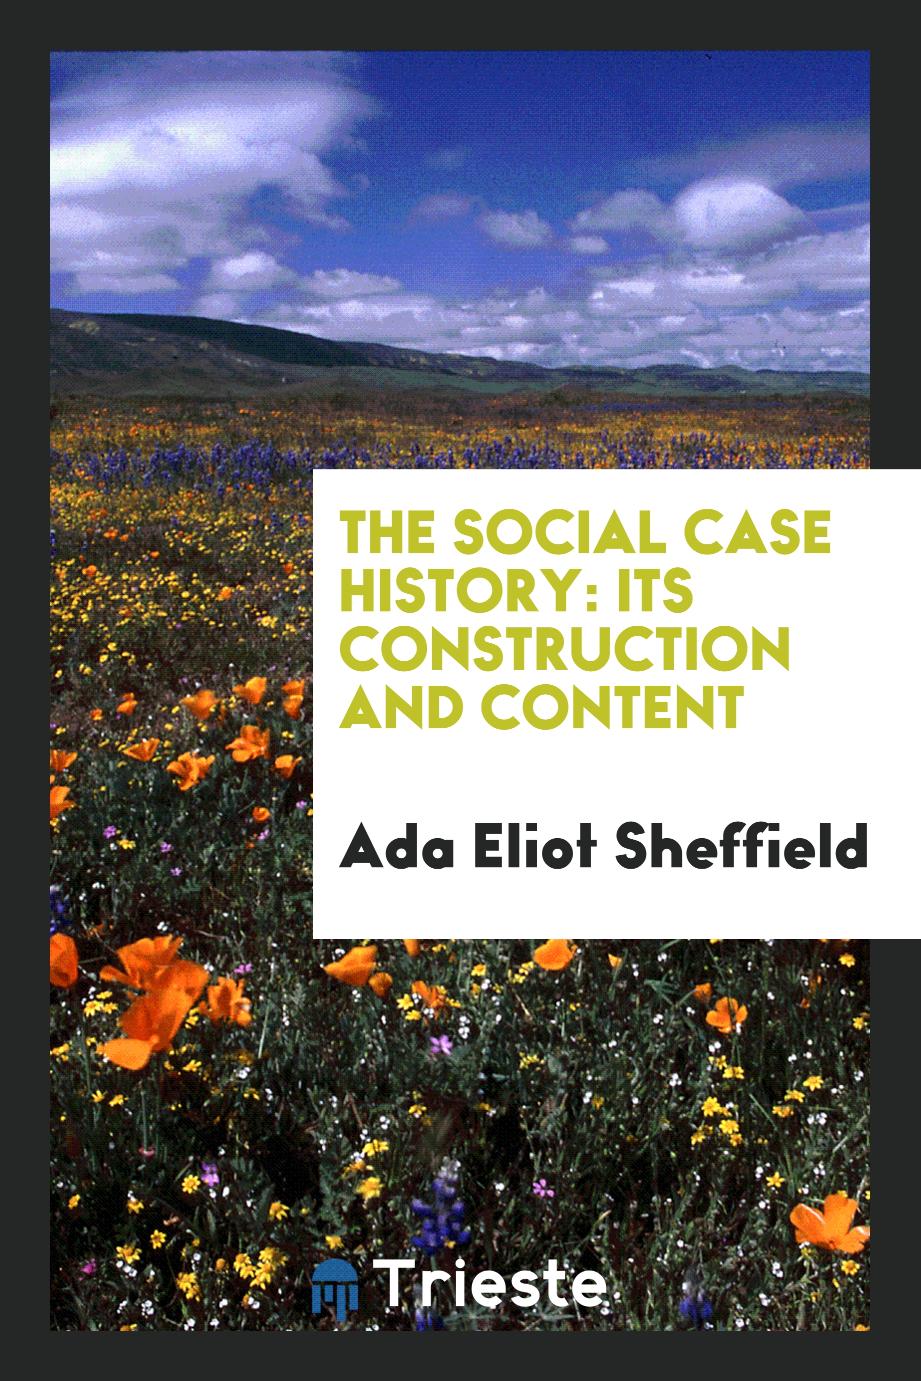 The social case history: its construction and content